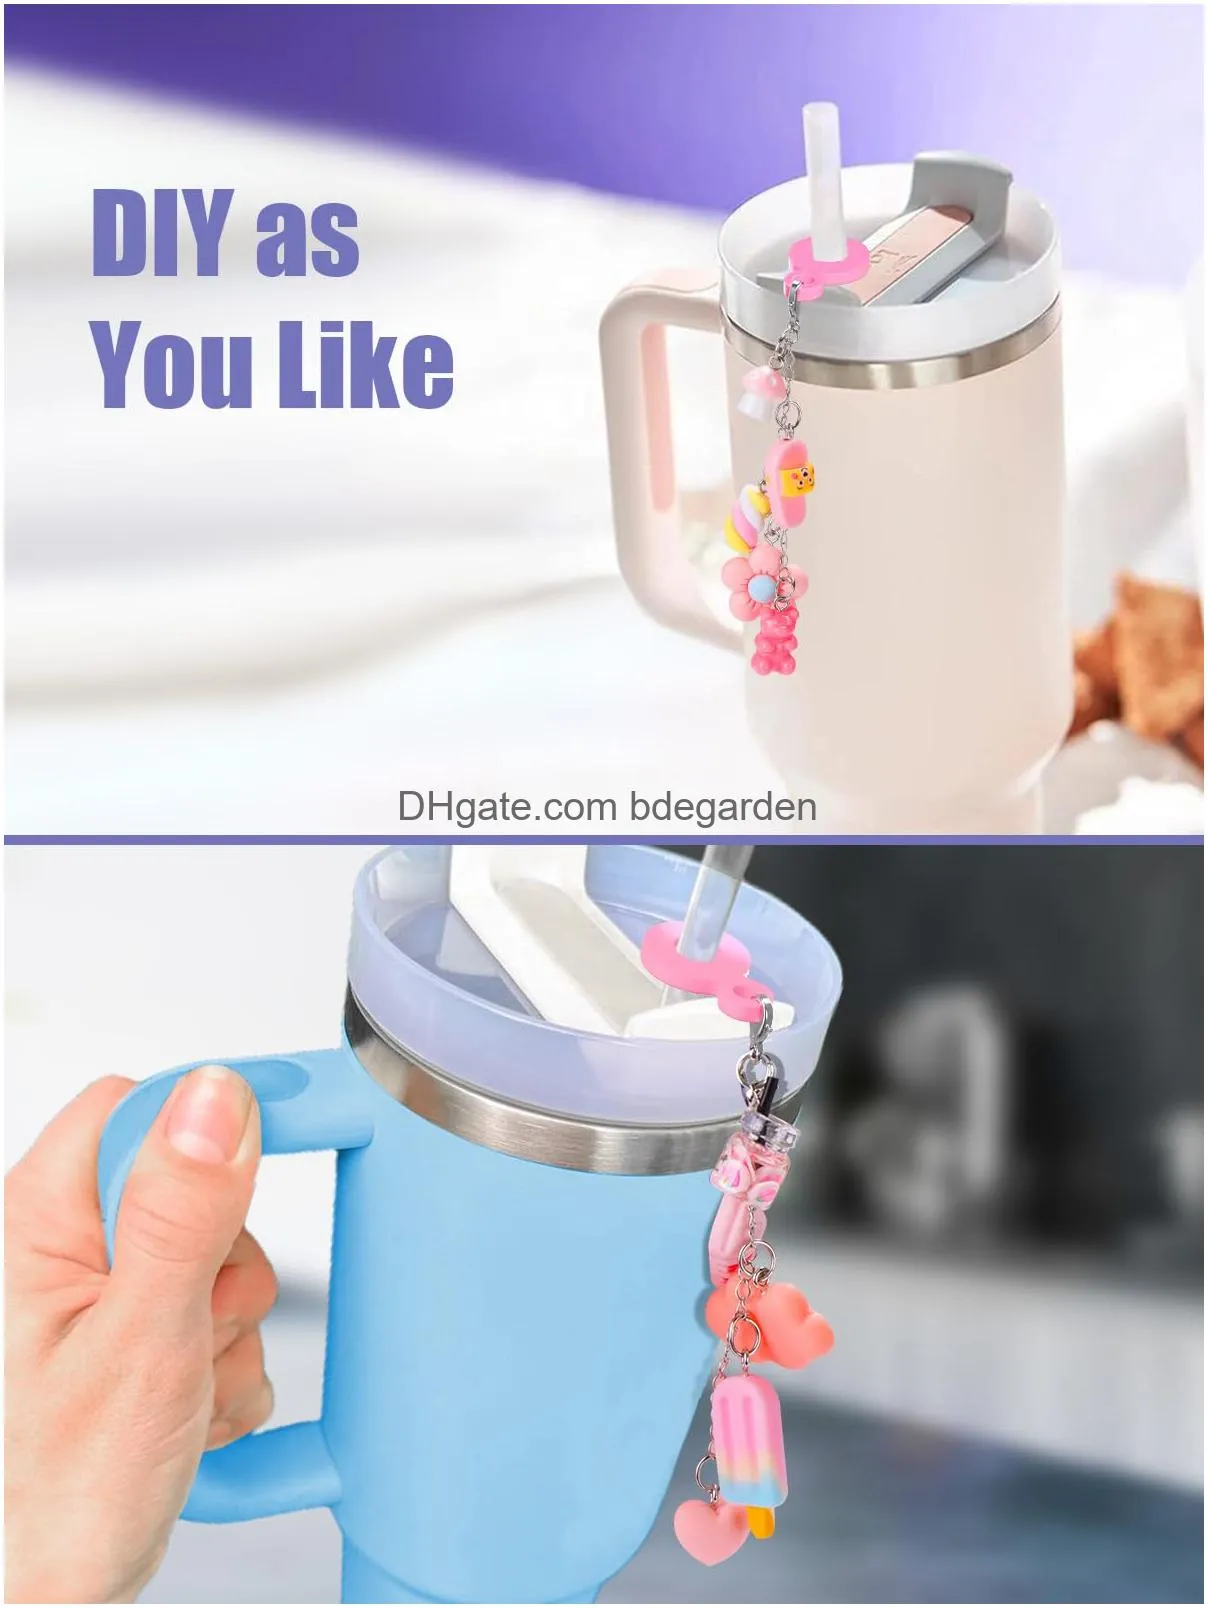 dangle straw toppers charm for  straw adapters charm blank and cute beads charms for  decorations designed for  cup pink accessories 14oz 20oz 30oz 40 oz tumbler